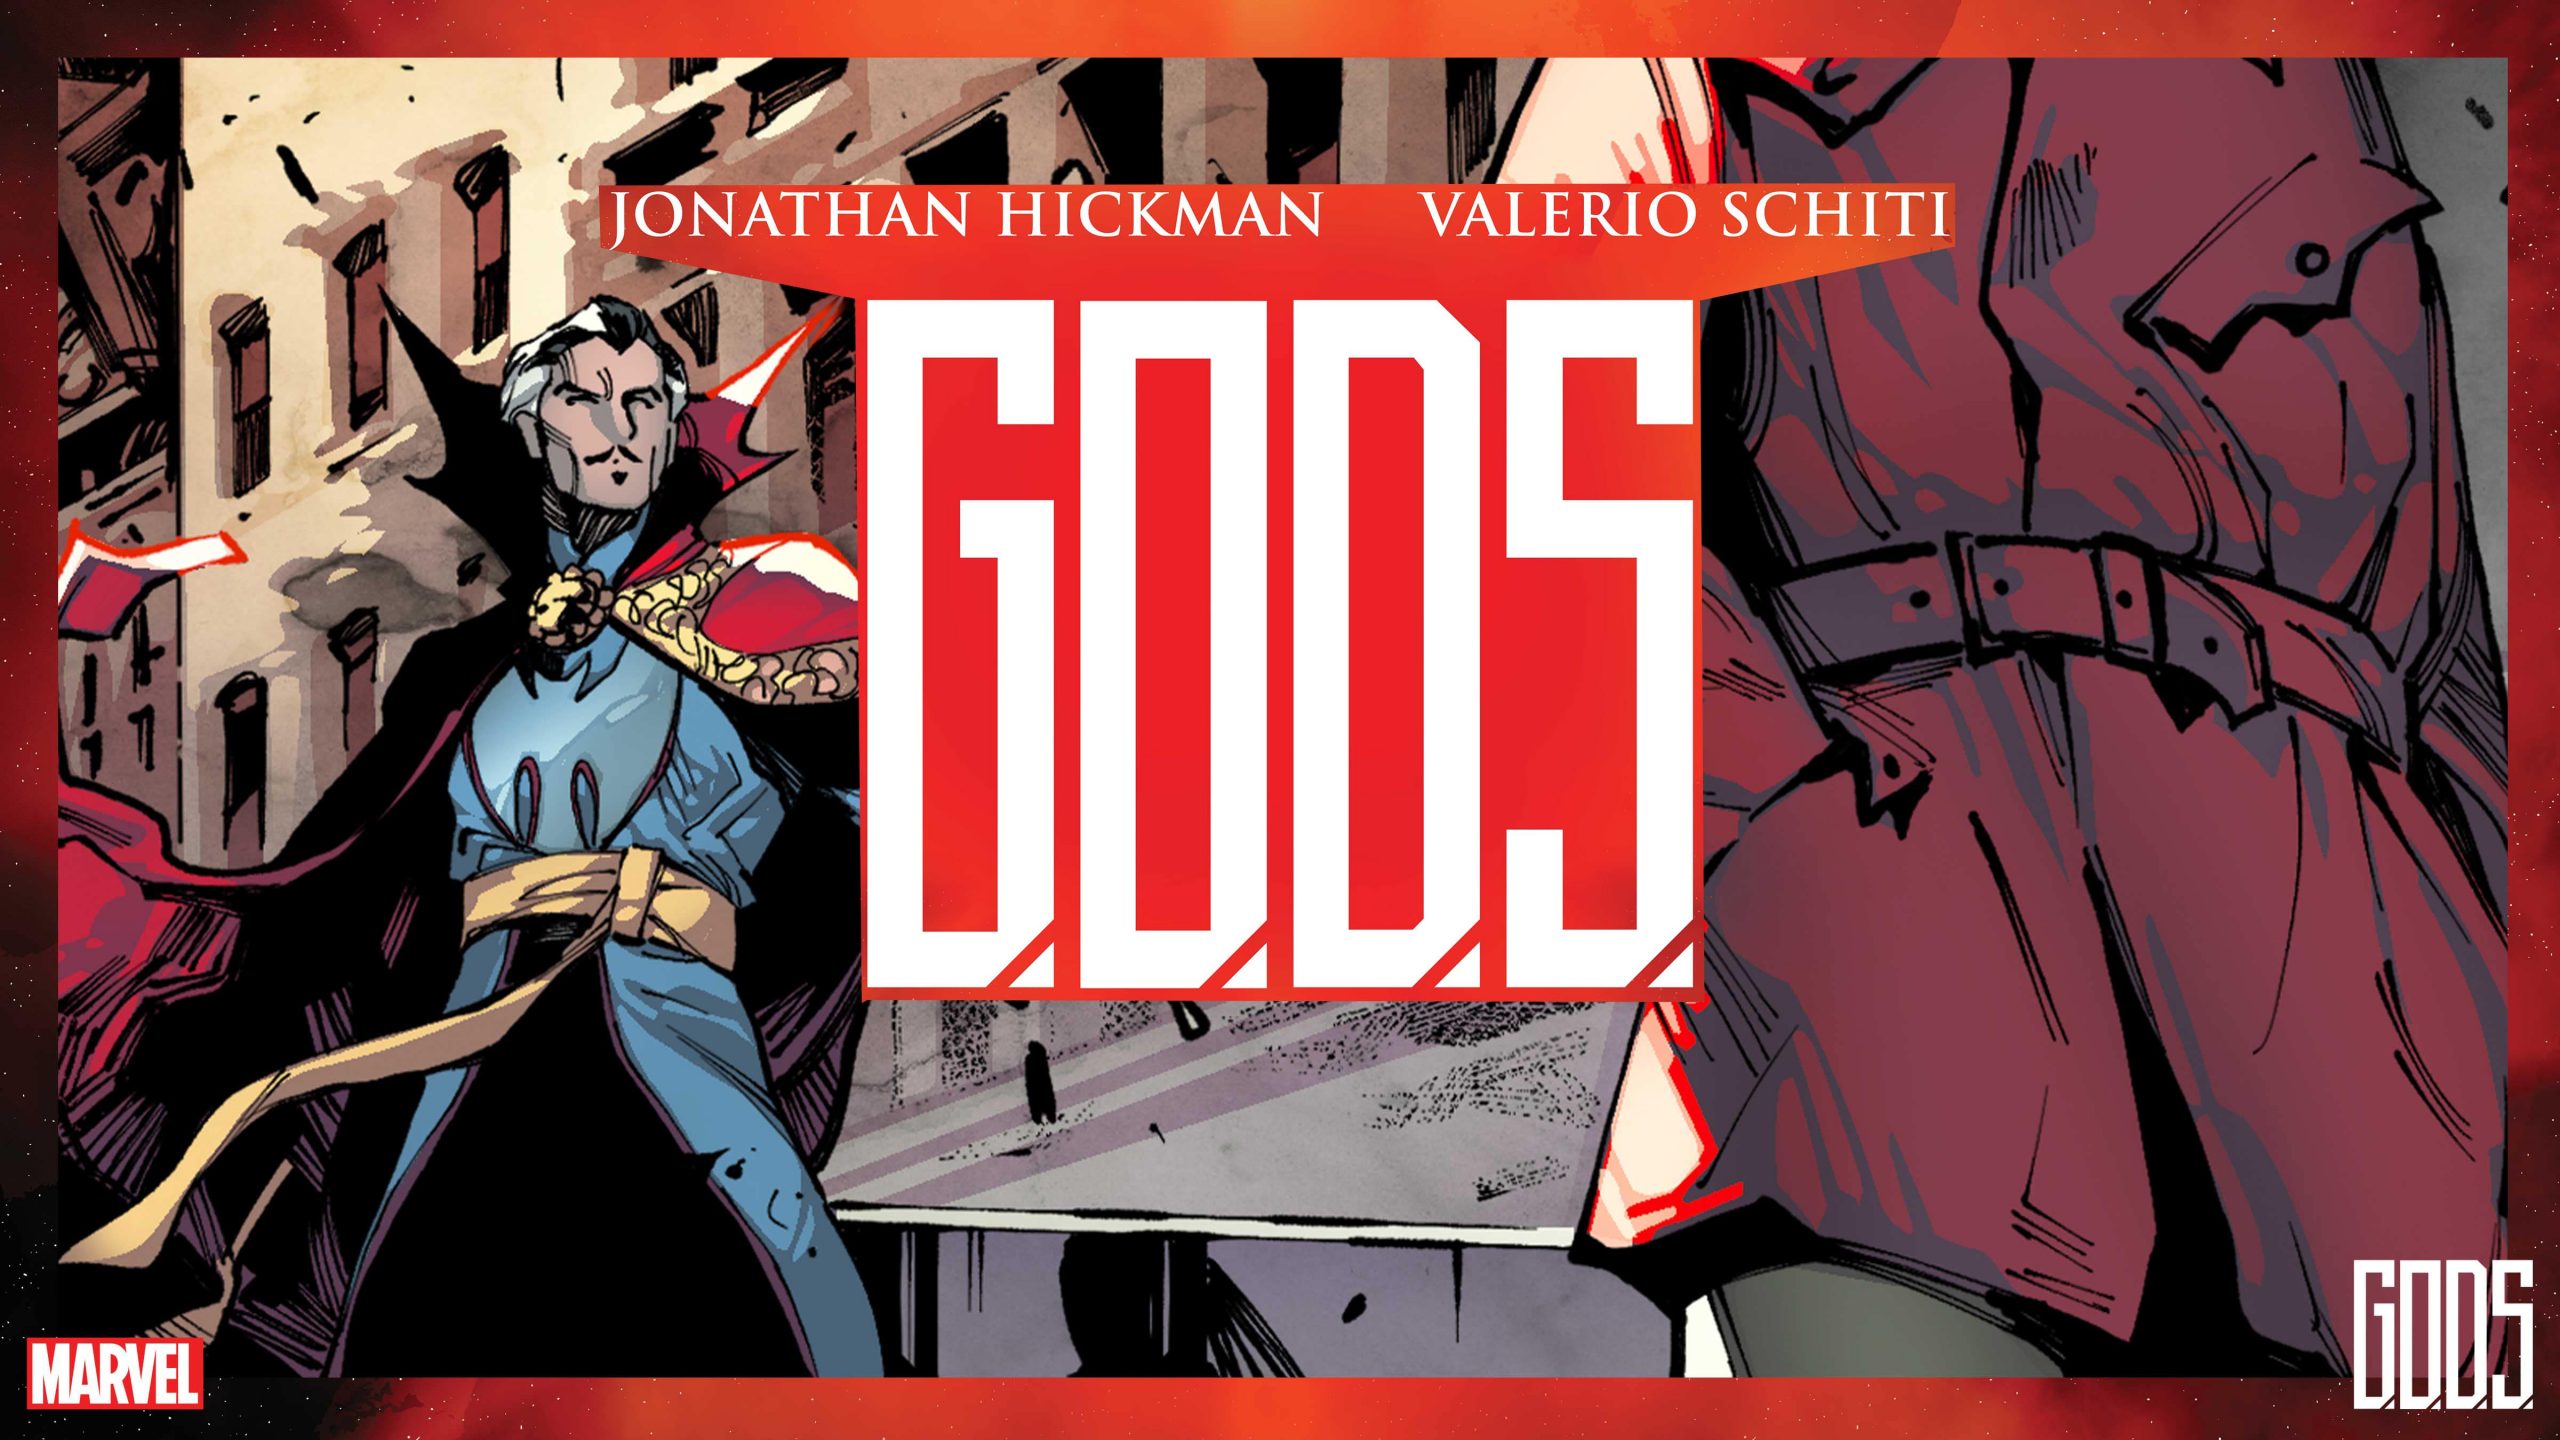 New Marvel mythology promised in Jonathan Hickman and Valerio Schiti's 'G.O.D.S.' #1